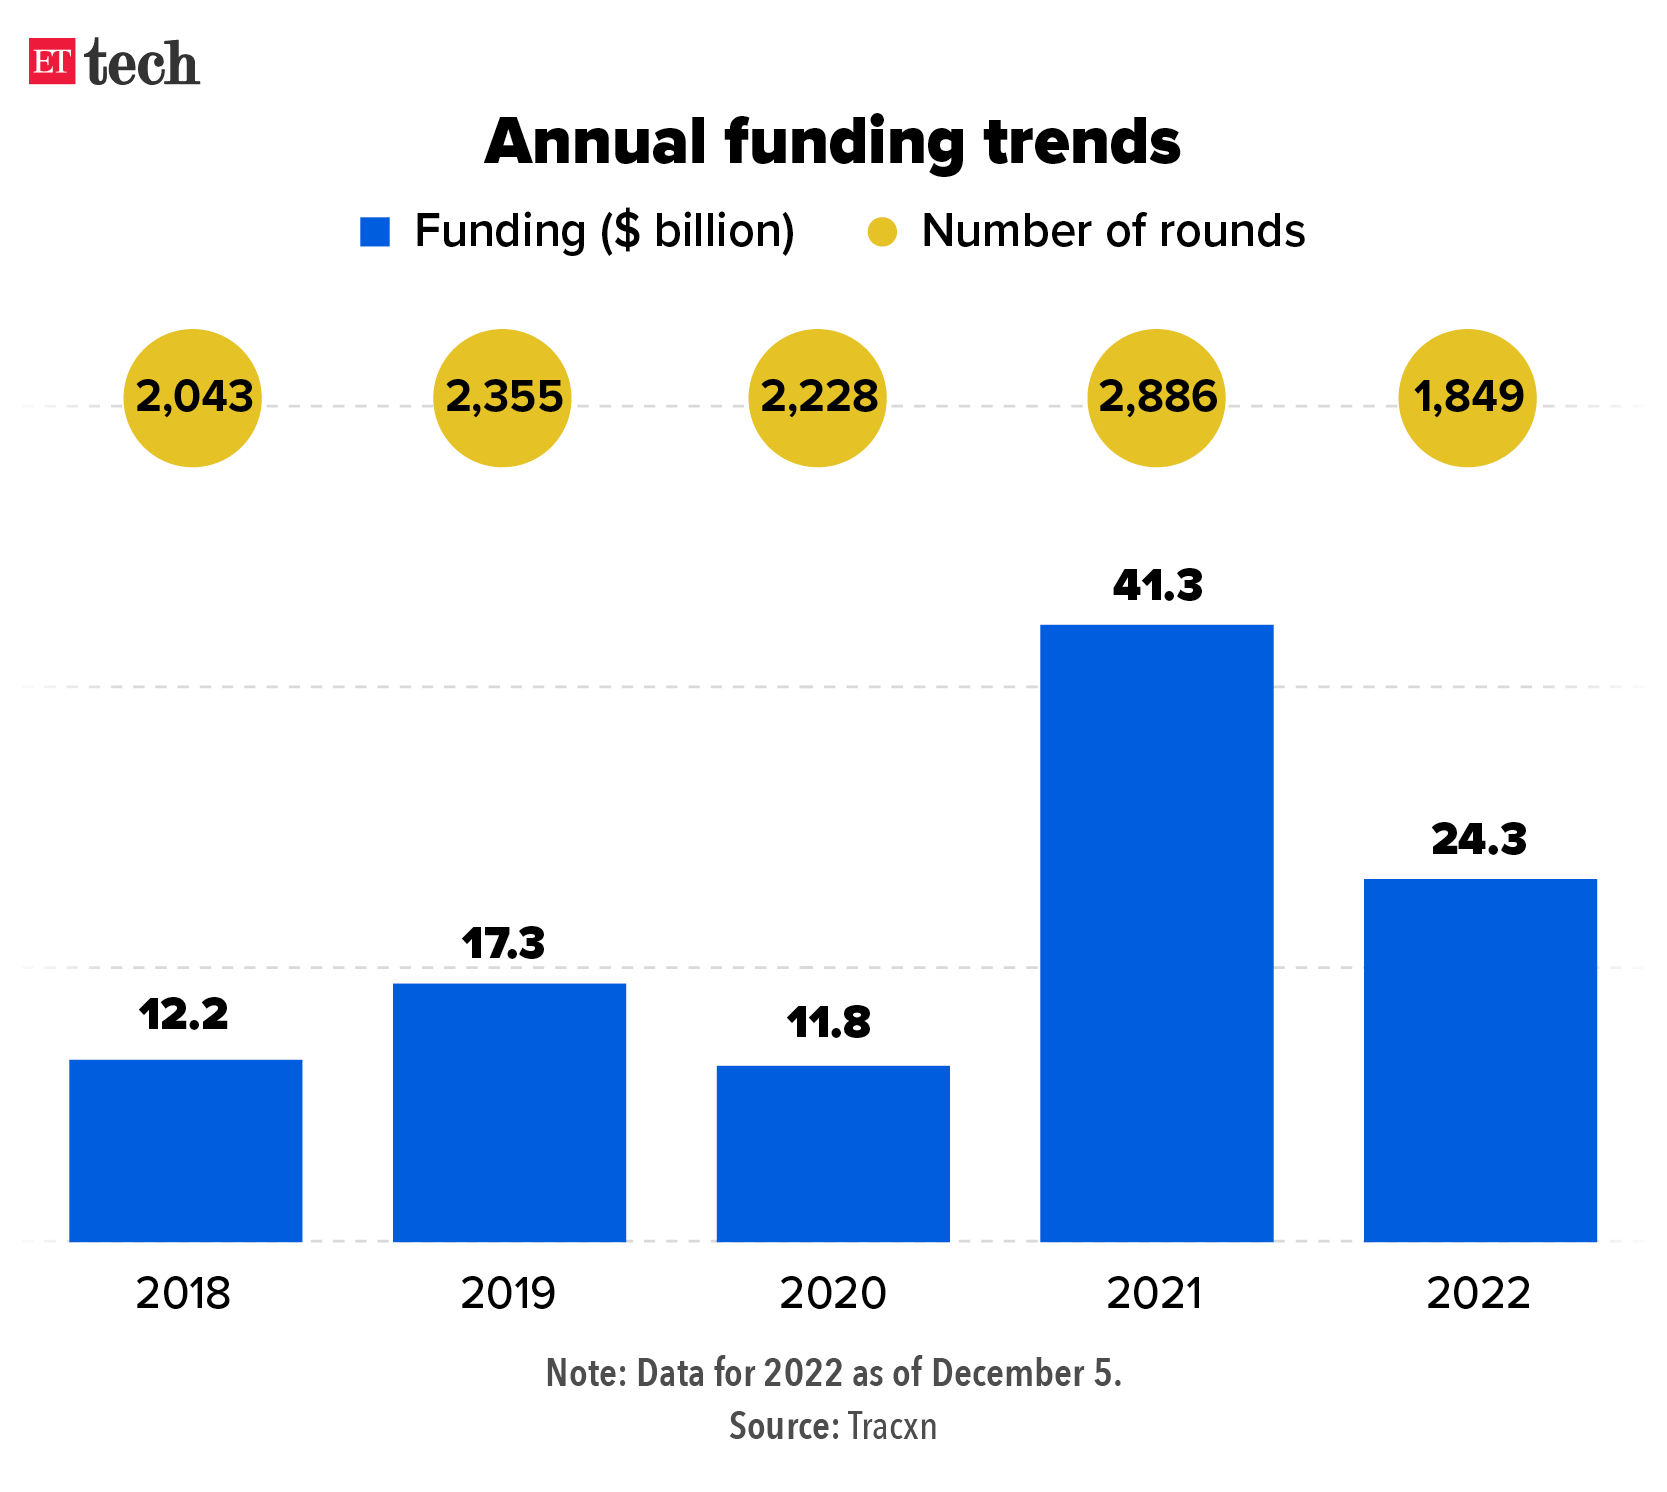 Annual funding trends